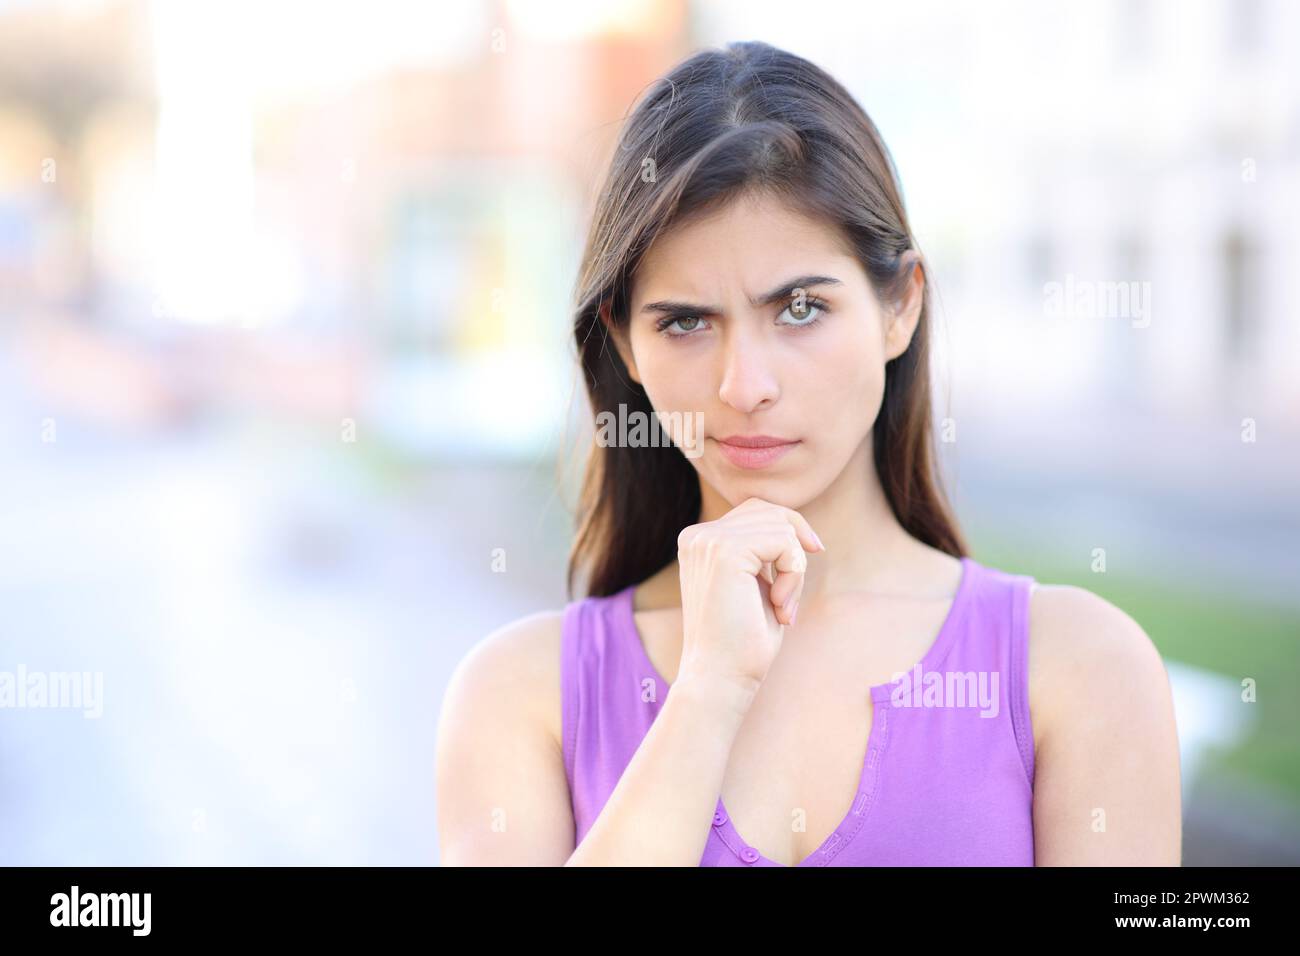 Front view portrait of a suspicious woman looking at camera standing in the street Stock Photo